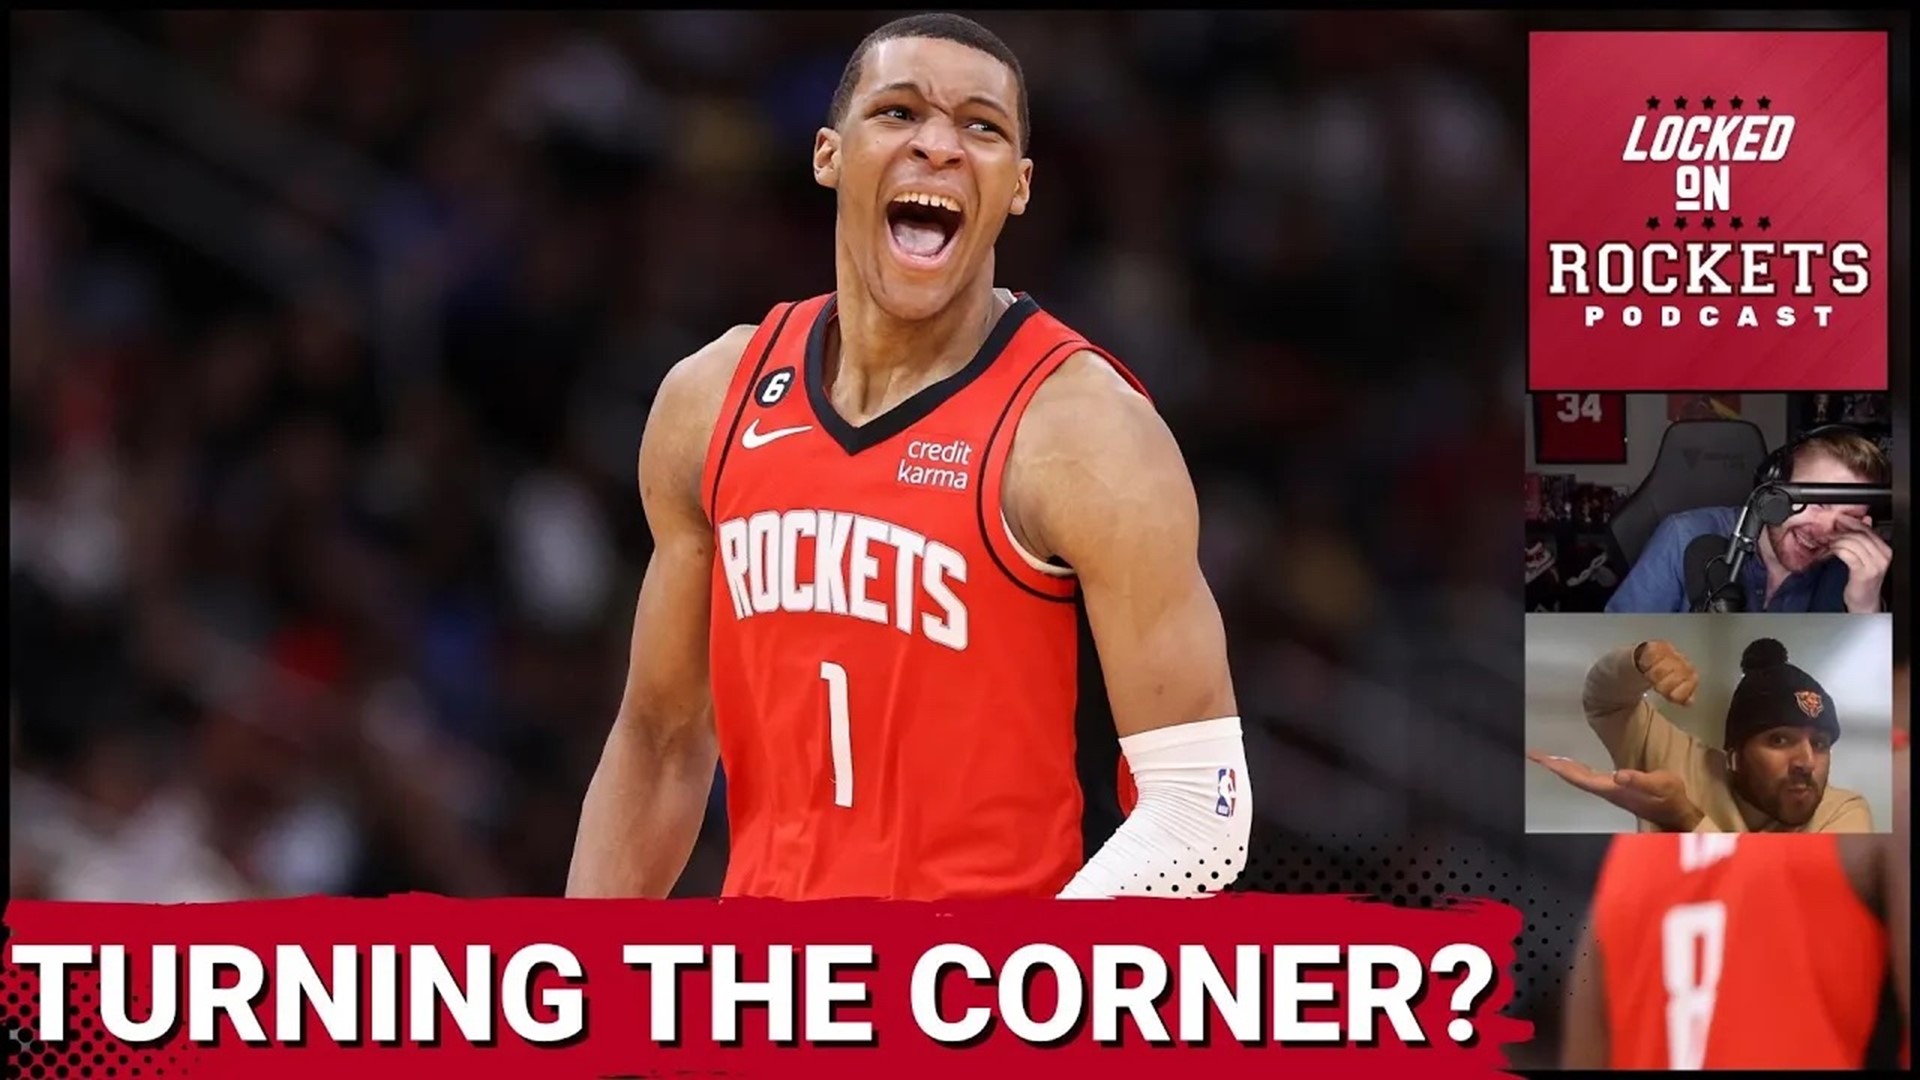 Host Jackson Gatlin is joined by weekly cohost Alykhan Bijani to discuss and break down Jabari Smith Jr.'s shooting now compared to earlier this season.